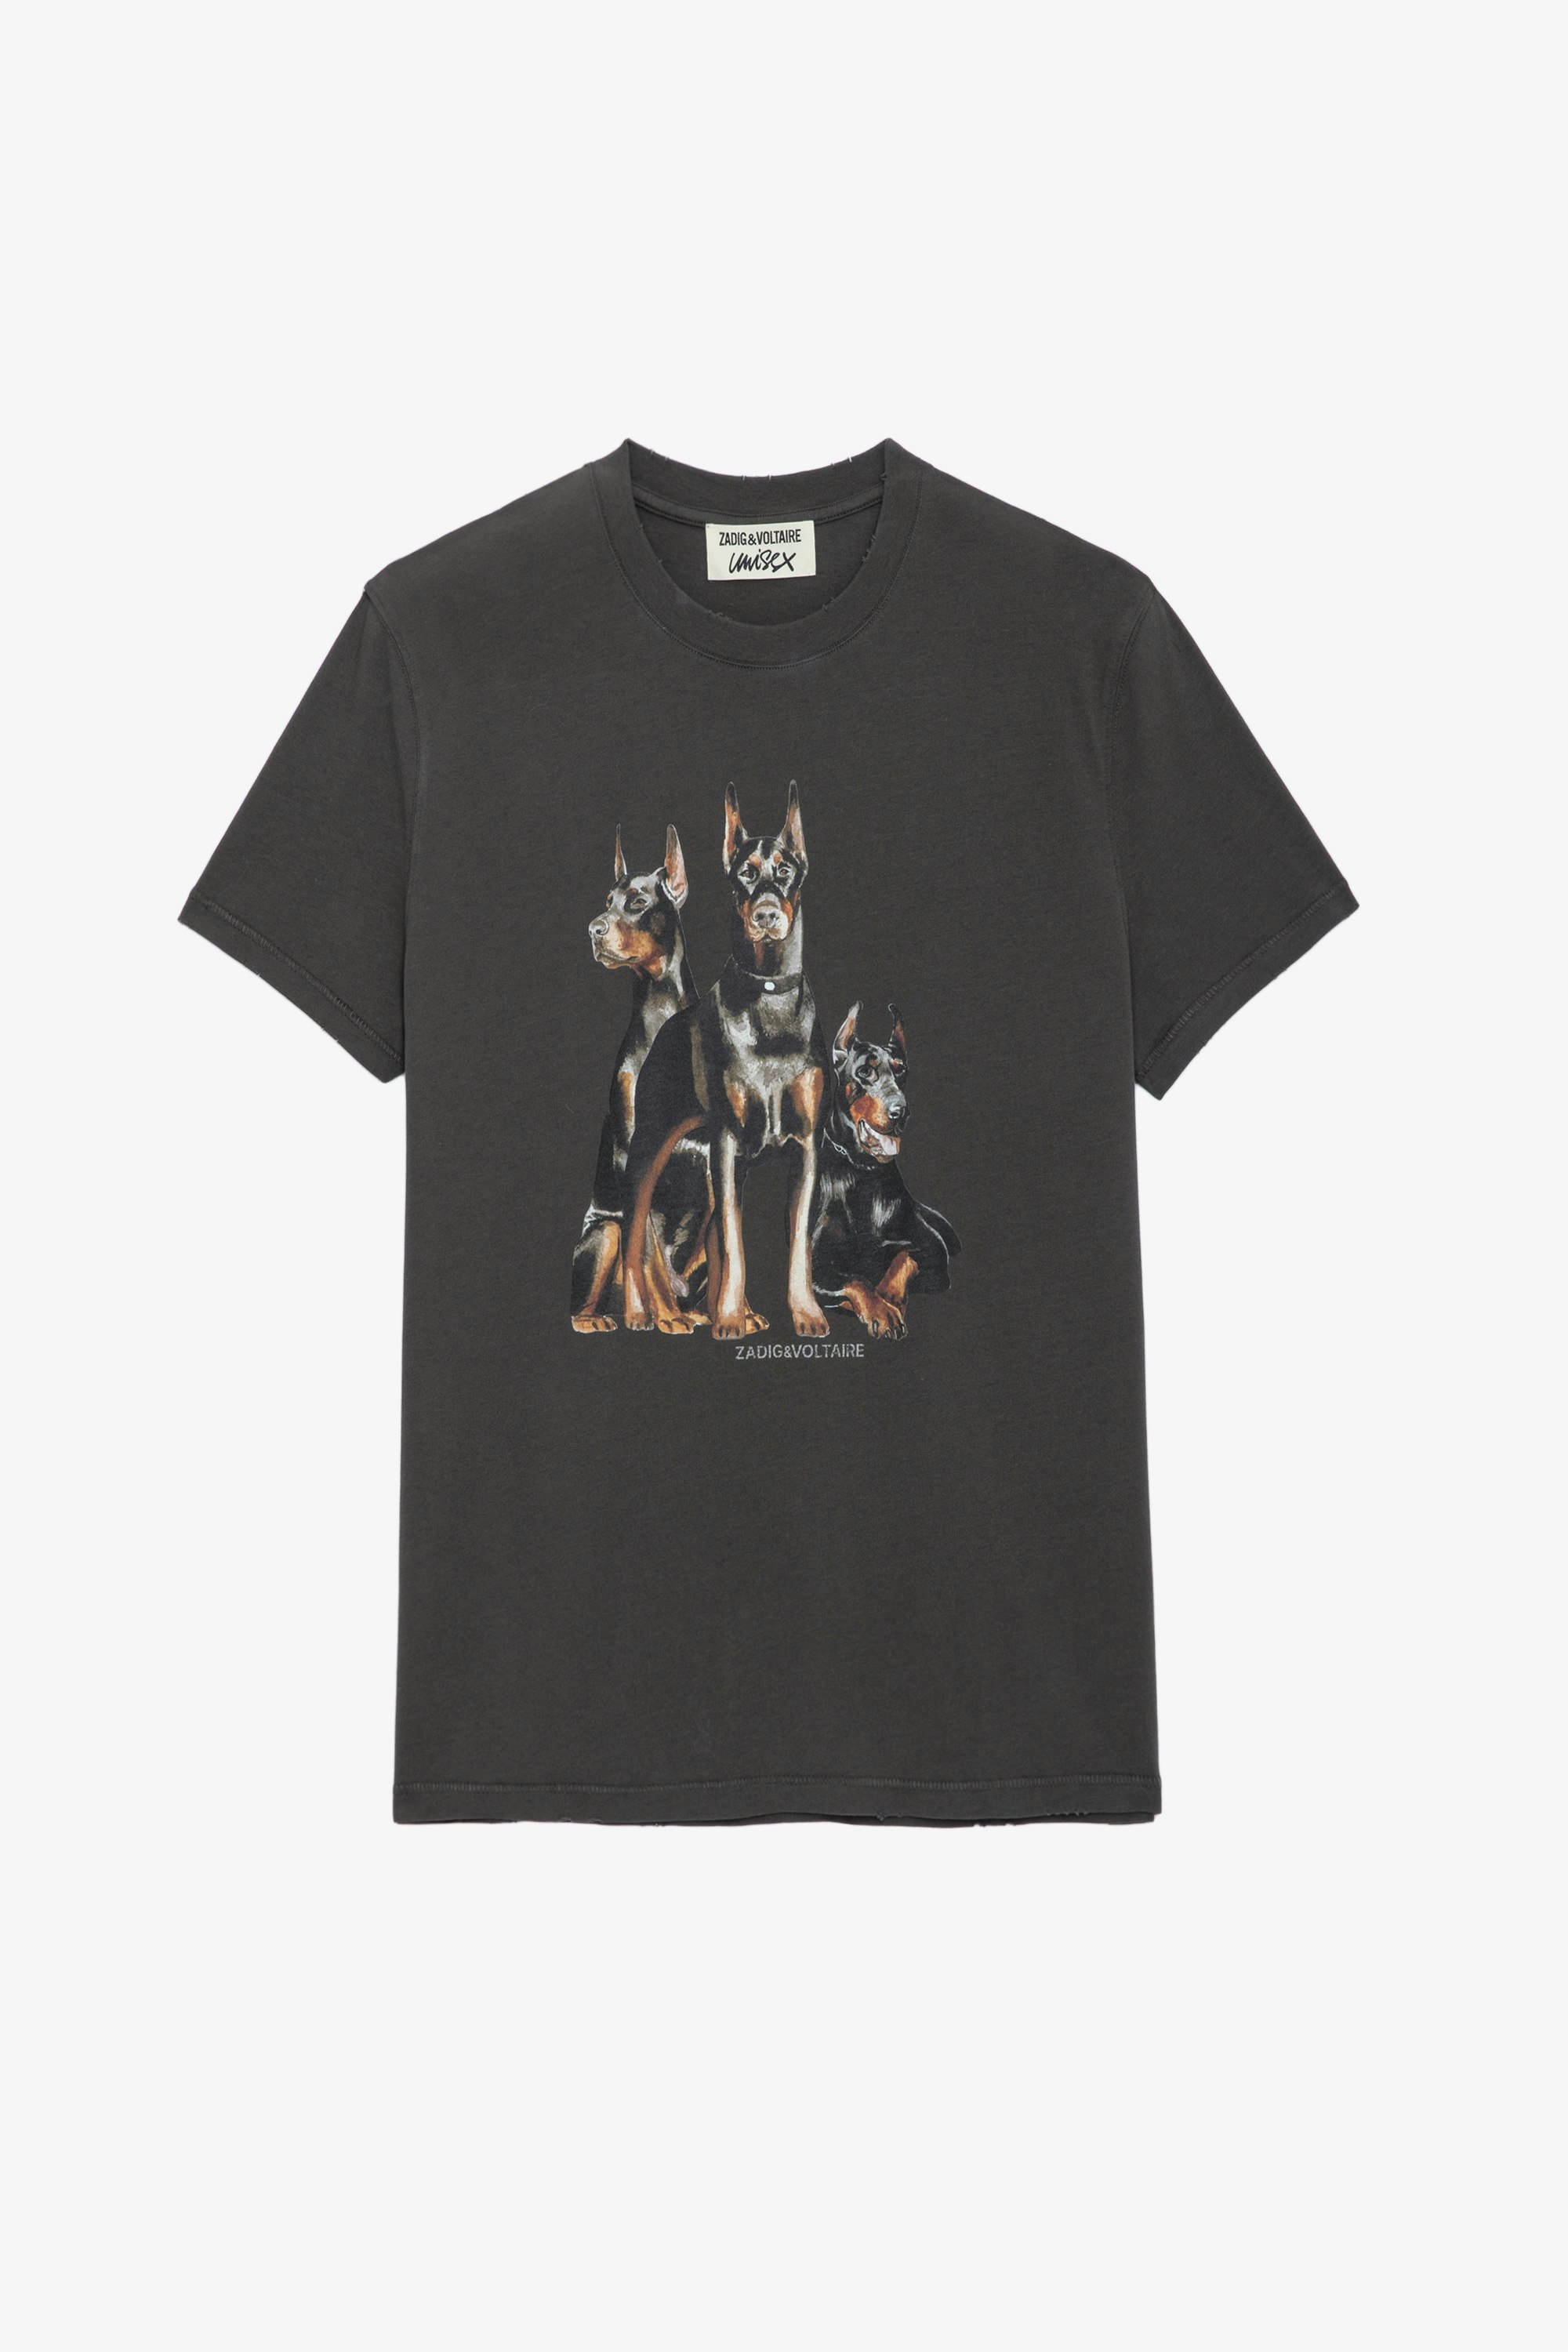 Jimmy T-shirt - Brown cotton short-sleeved T-shirt with Doberman and Concert prints.